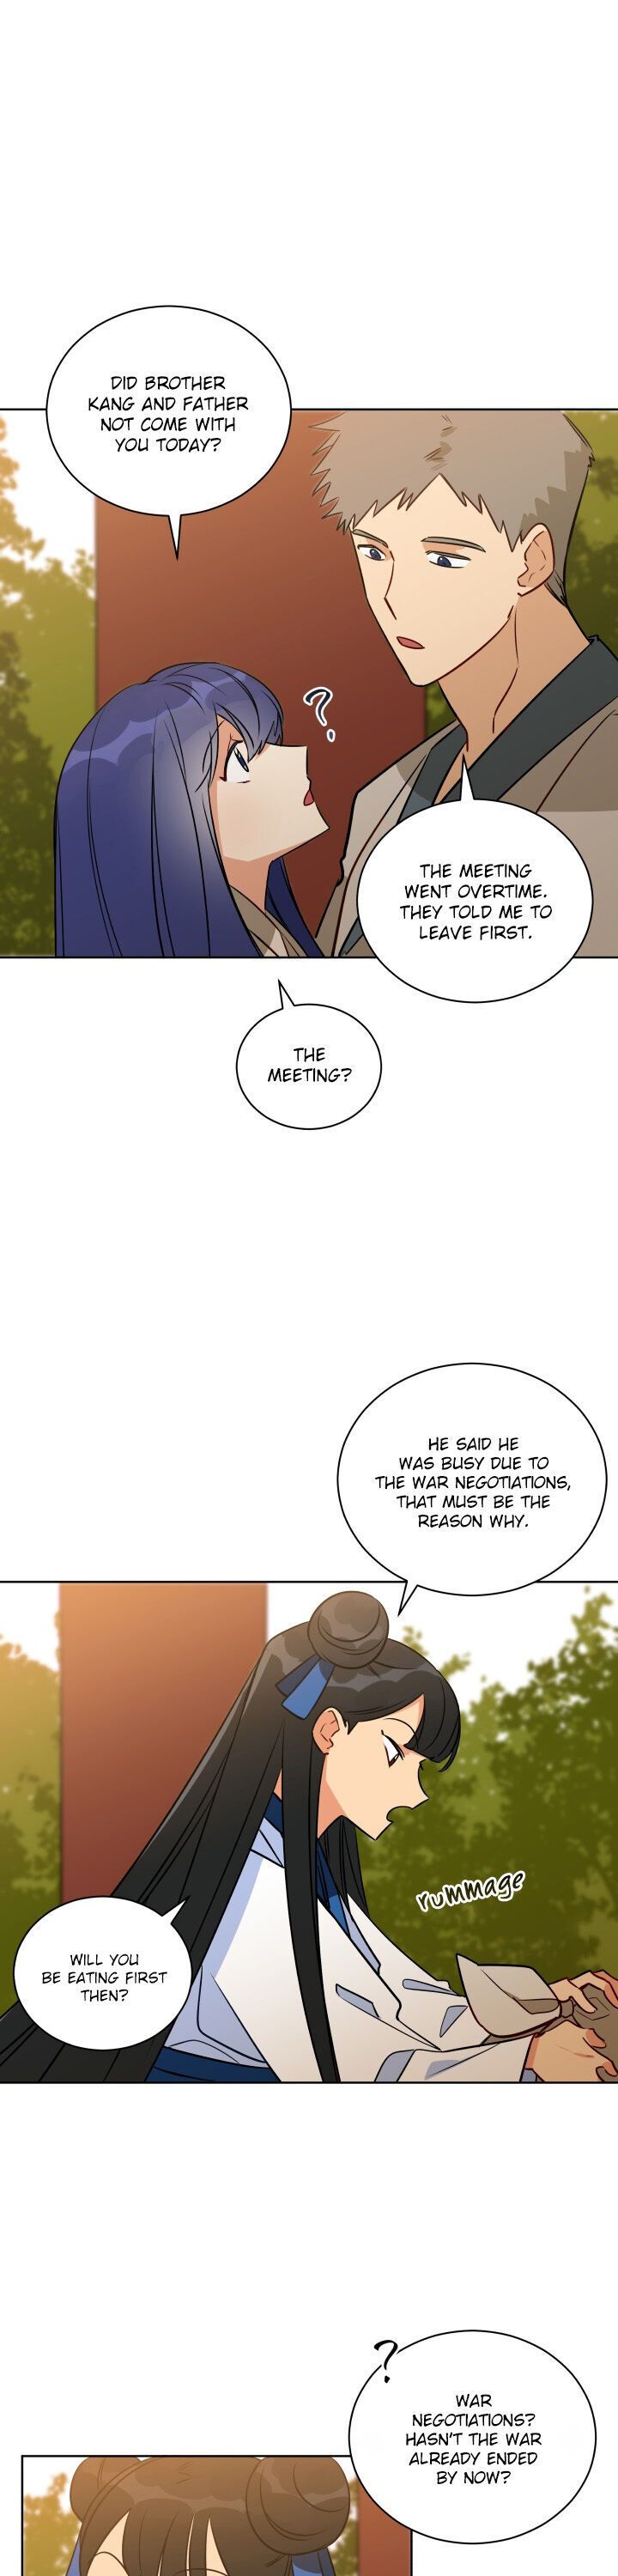 Beast with Flowers Chapter 52 page 4